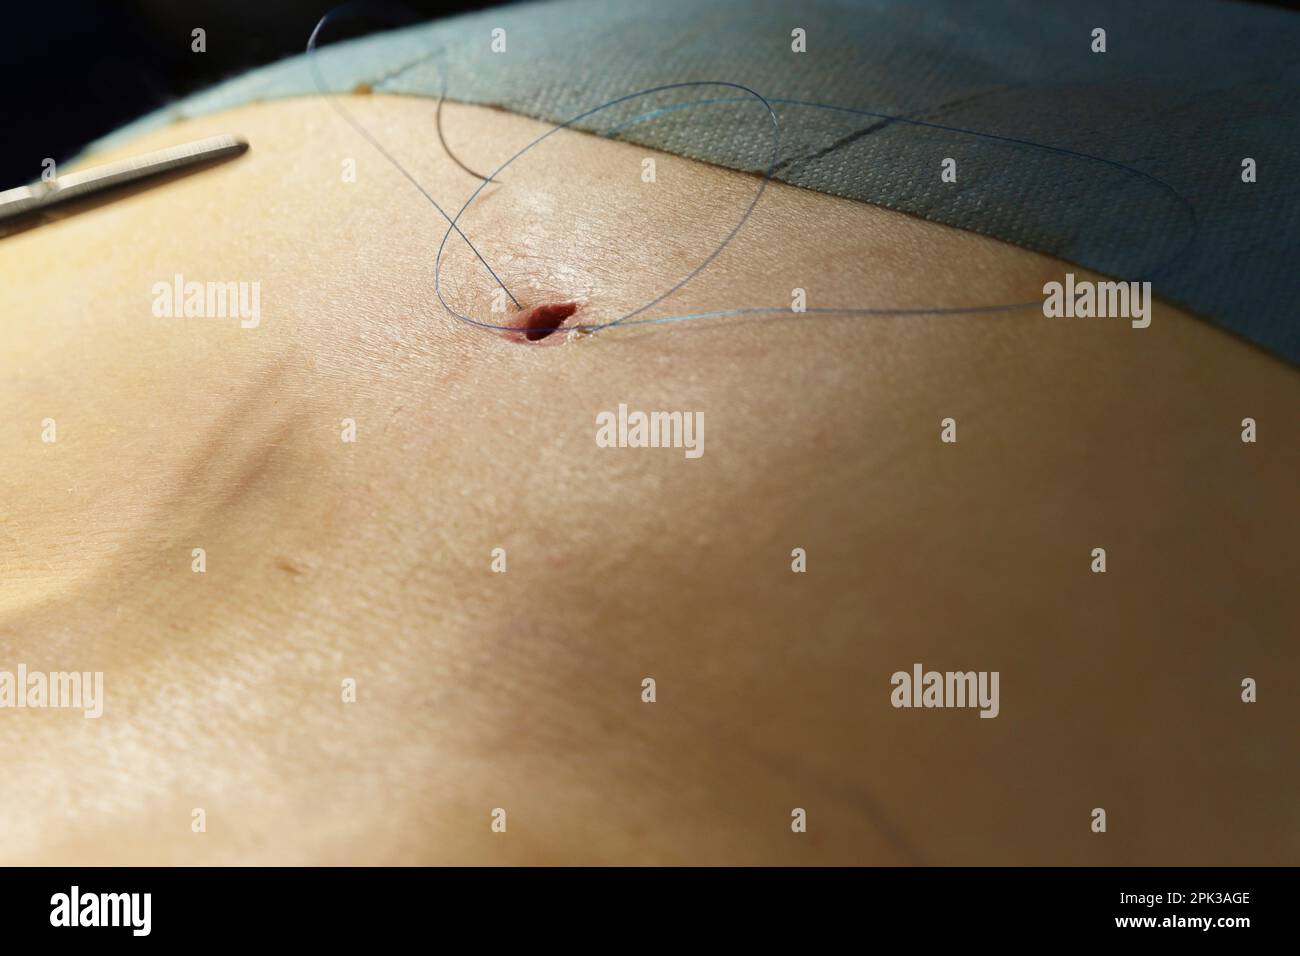 suturing a wound in the operating room Stock Photo